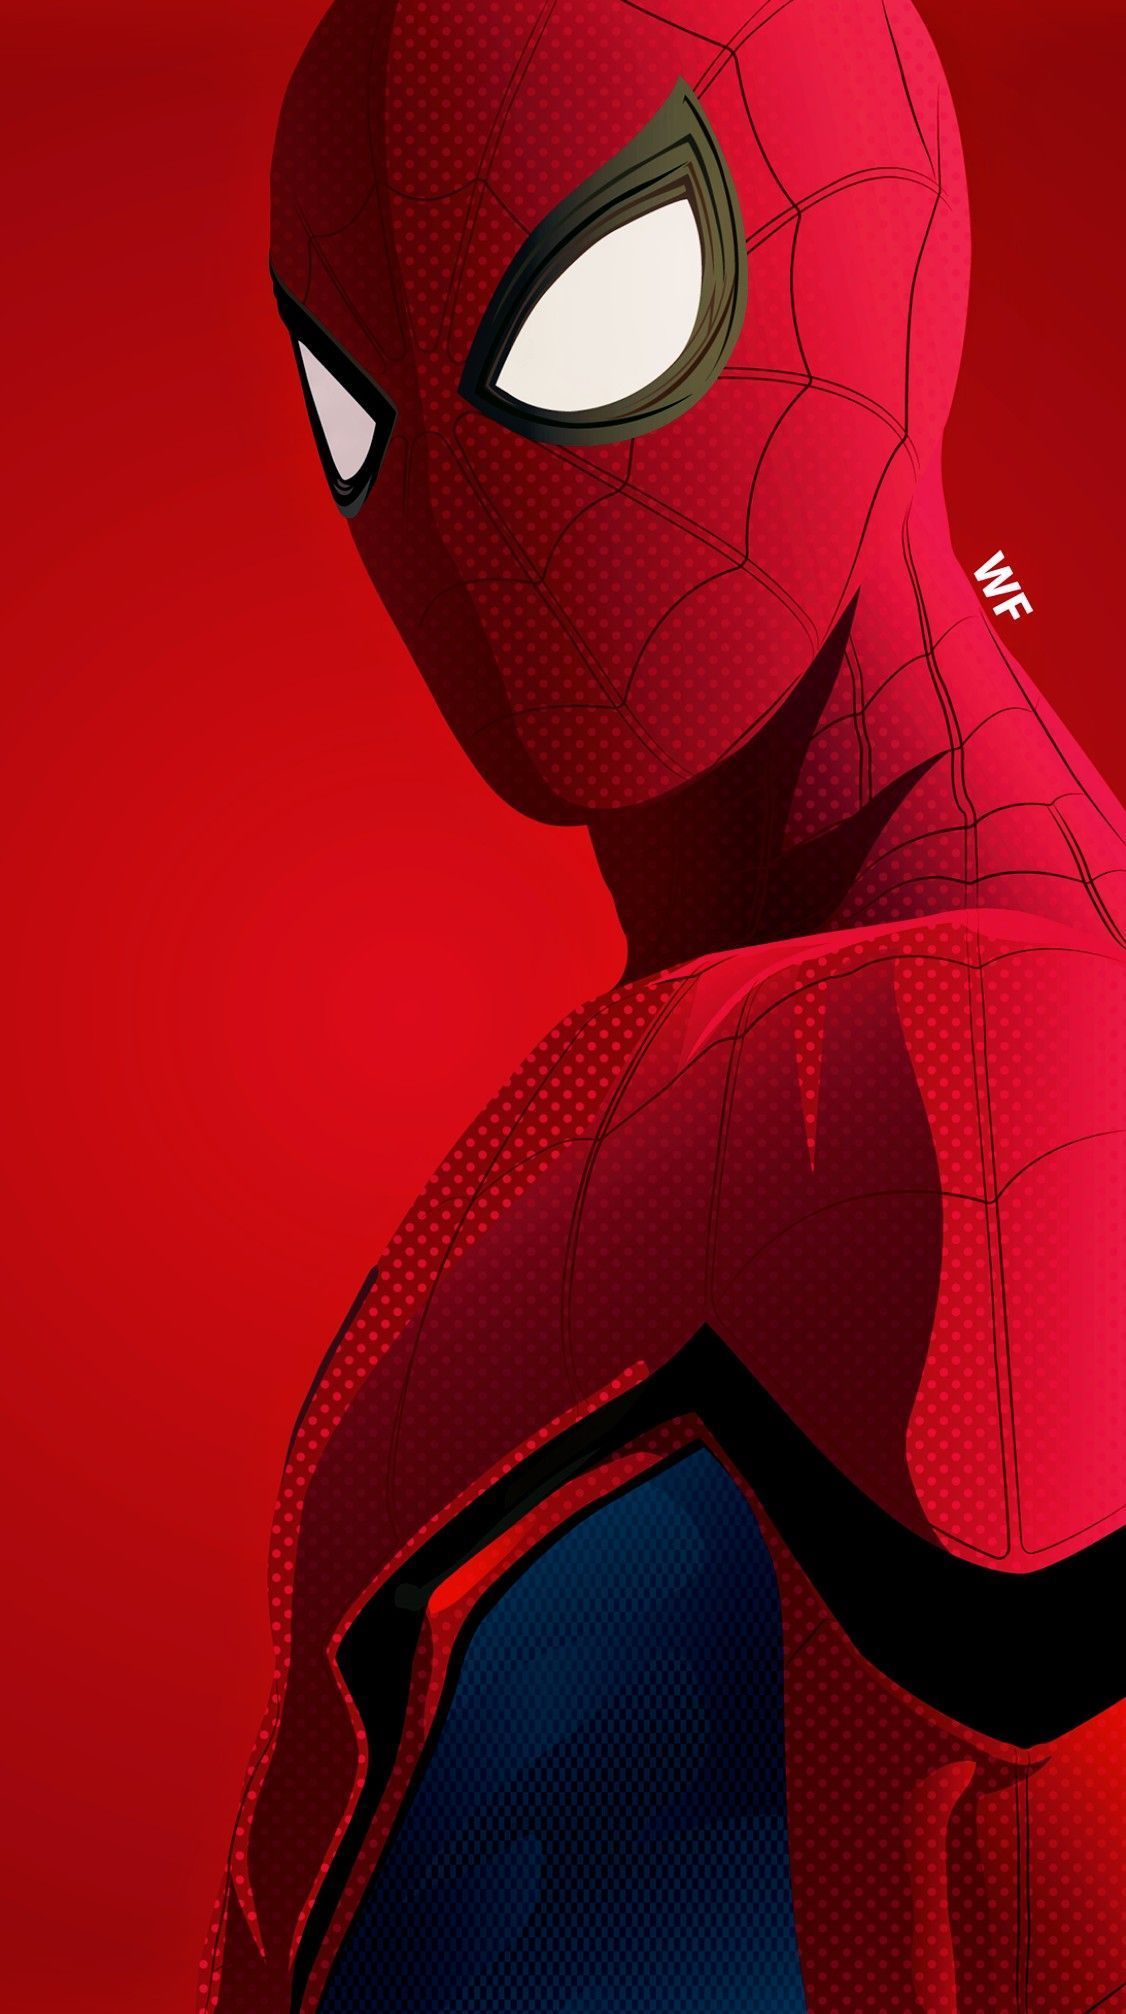 iPhone Marvel Wallpaper HD from Uploaded by user. Marvel